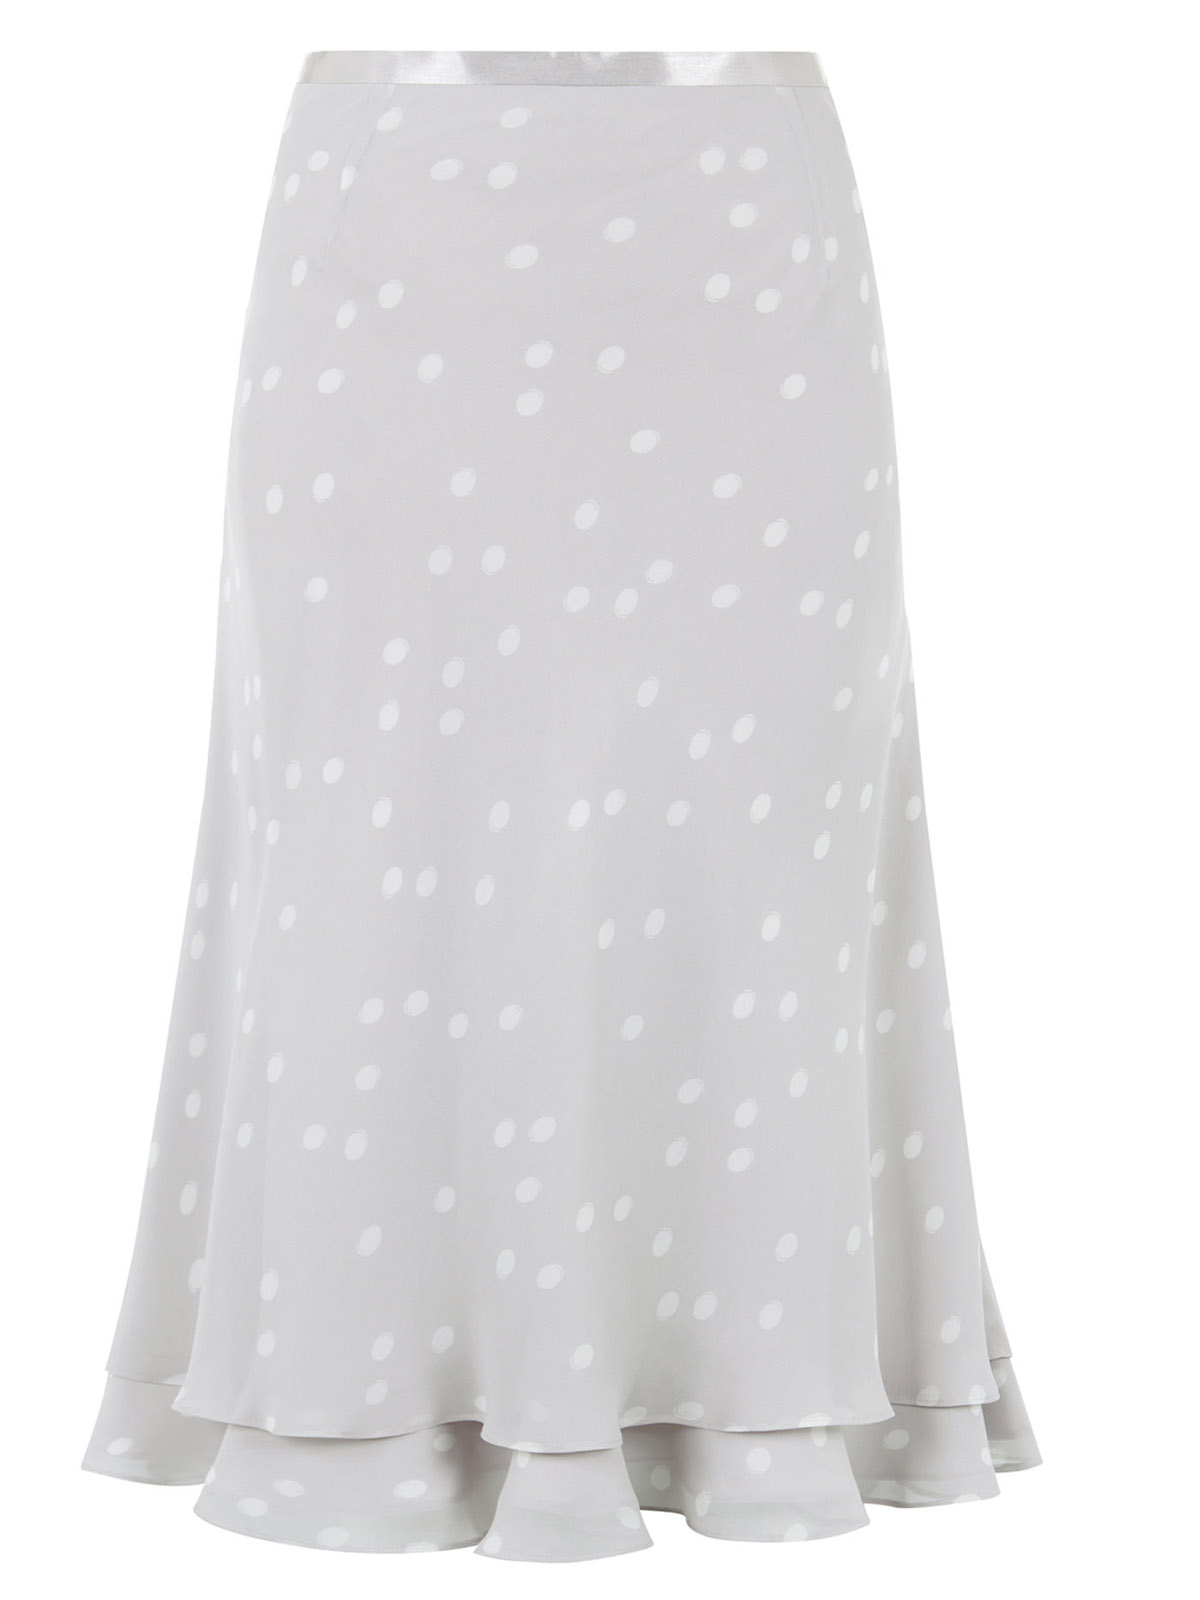 Jacques Vert - - Jacques V3RT Light Grey Spotted Chiffon Skirt and Top ...